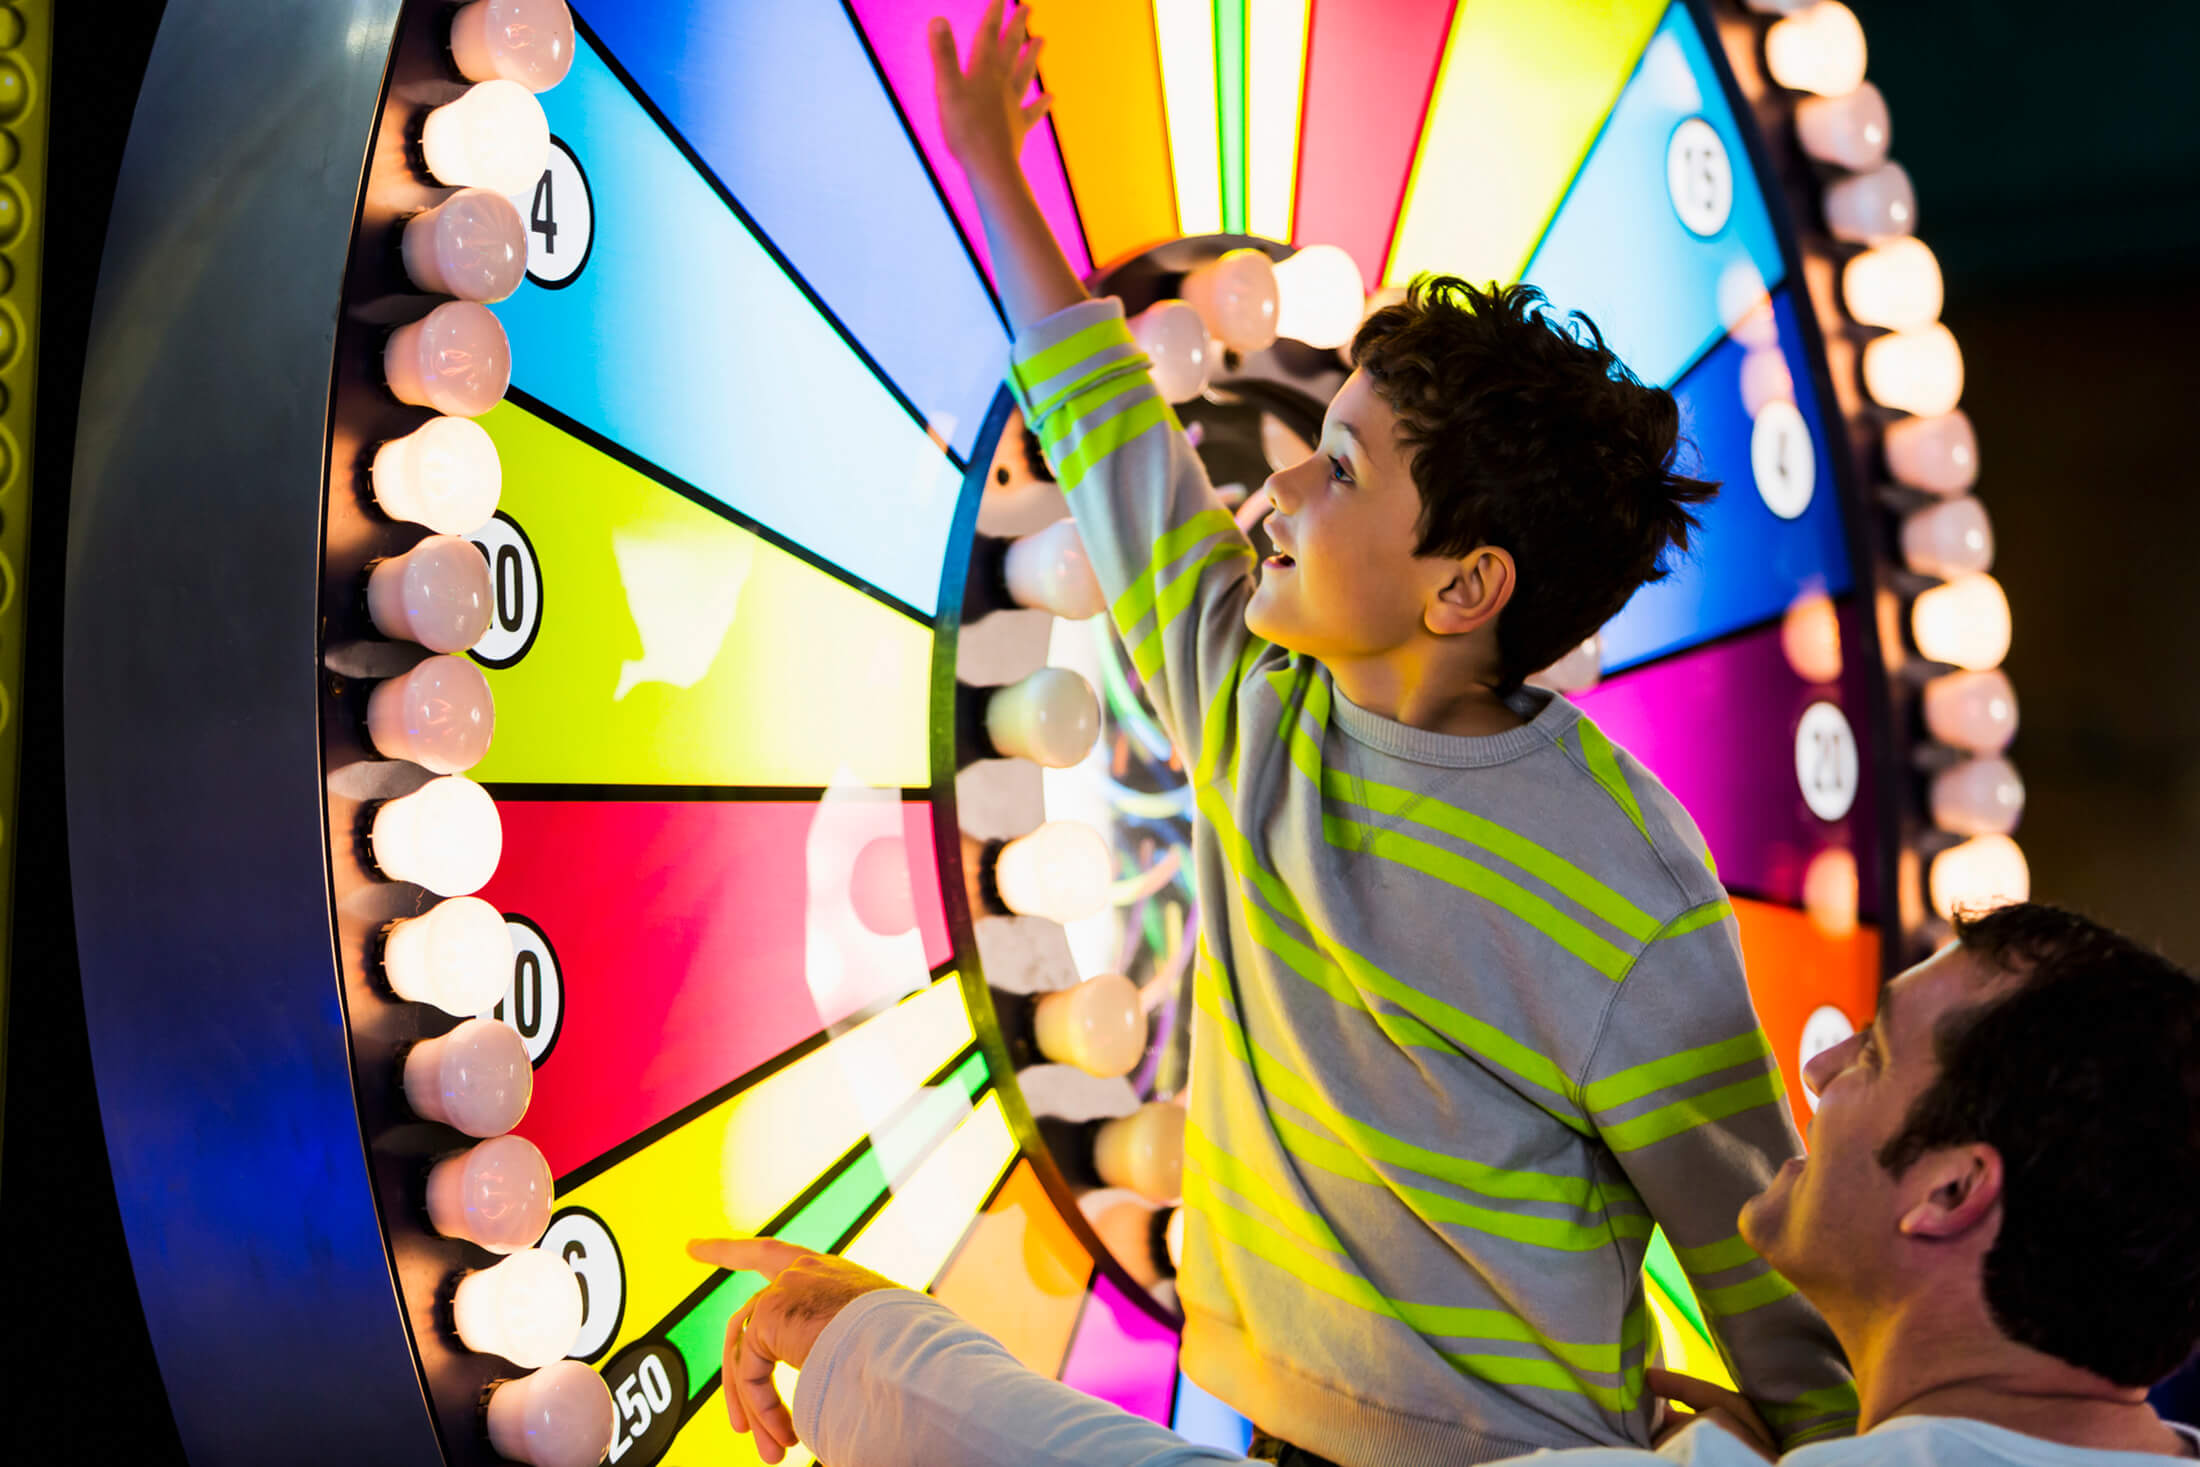 A child spinning a large glowing wheel in an arcade